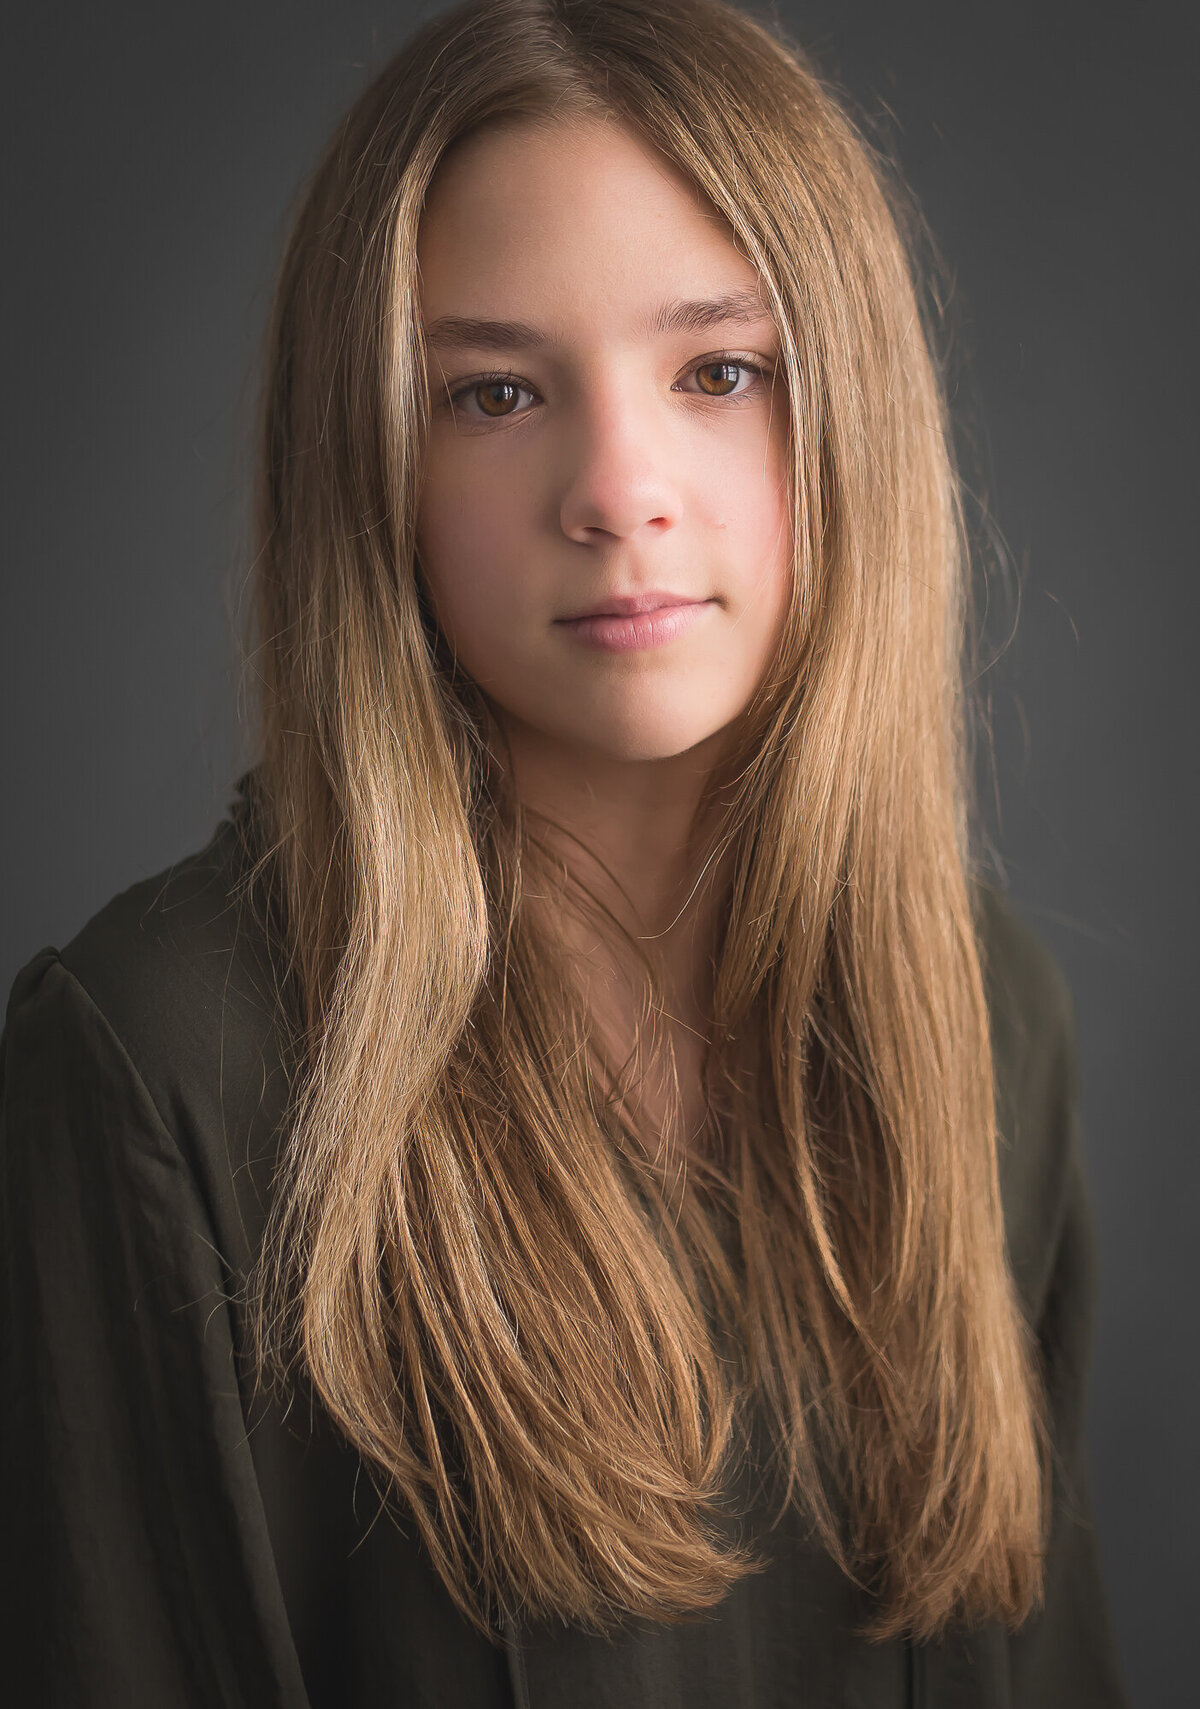 color portrait of a senor girl in a dark olive blouse with long blonde hair with a grey background